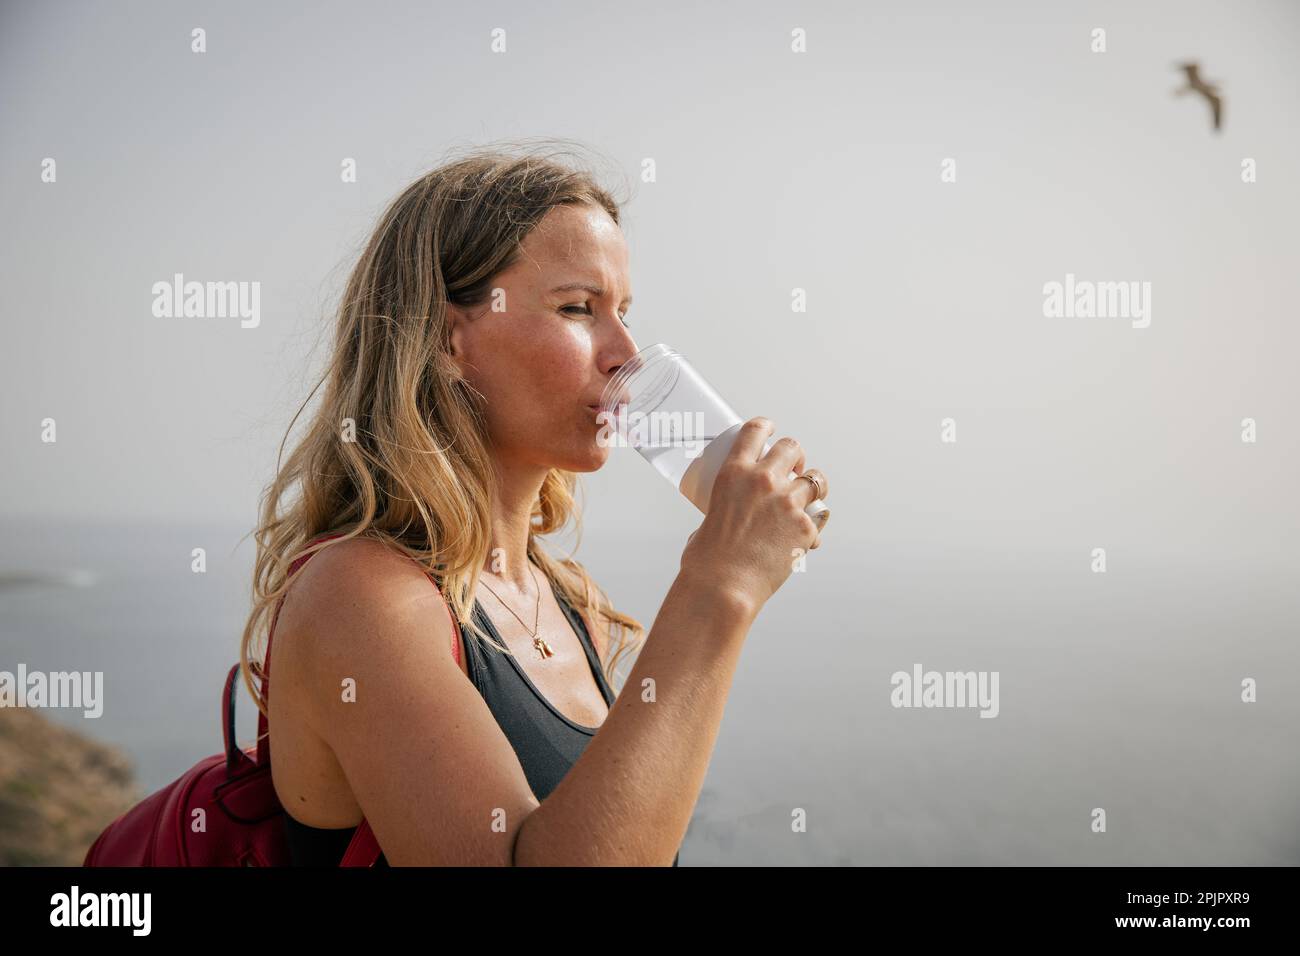 A female hiker drinks water during a hike, concept of hydration and health. Stock Photo